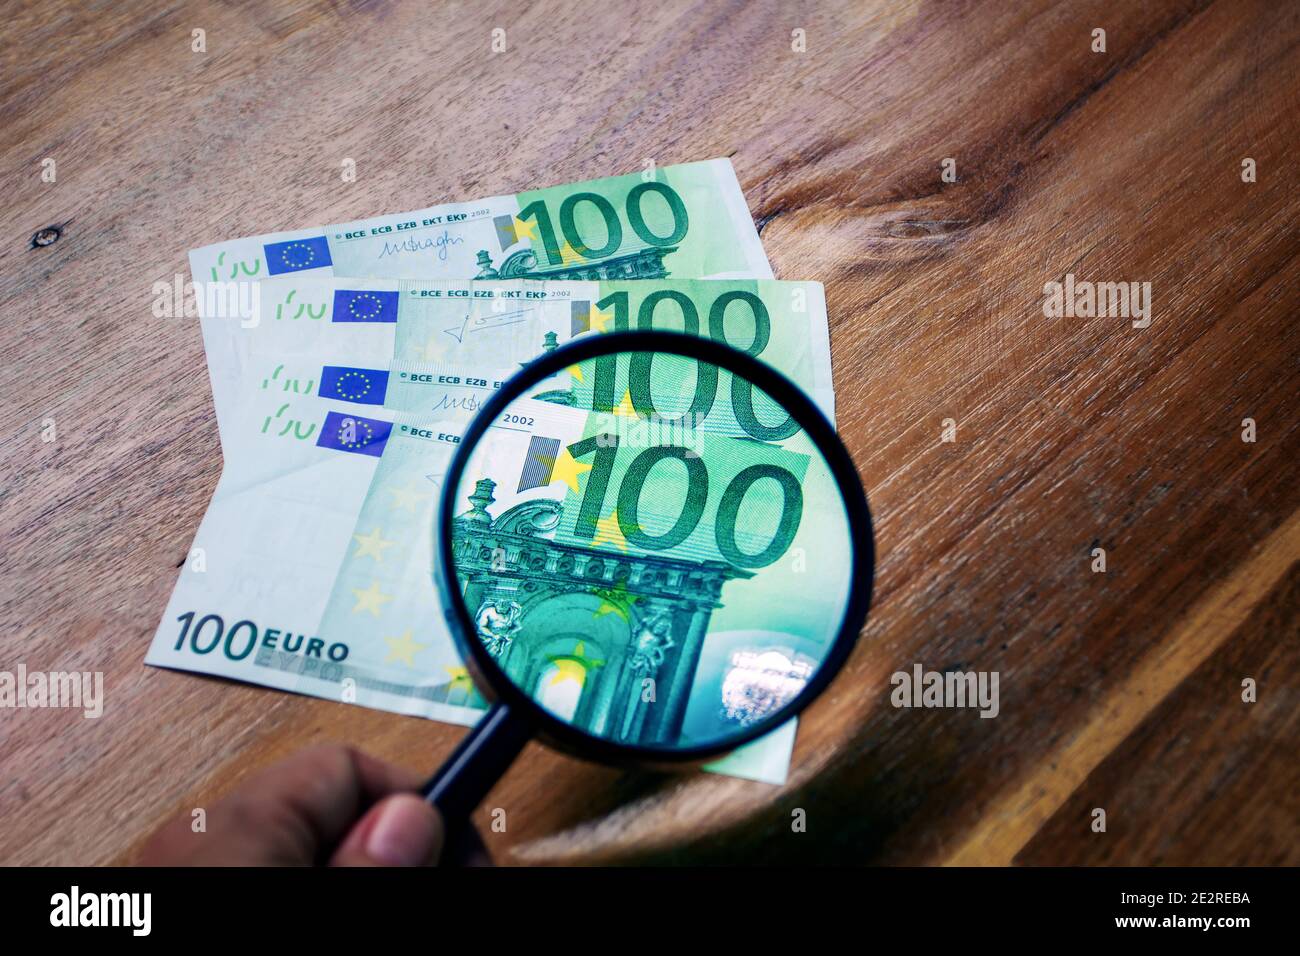 Magnification with a magnifying glass of the value of one of the hundred euro bills that are on a wooden surface Stock Photo